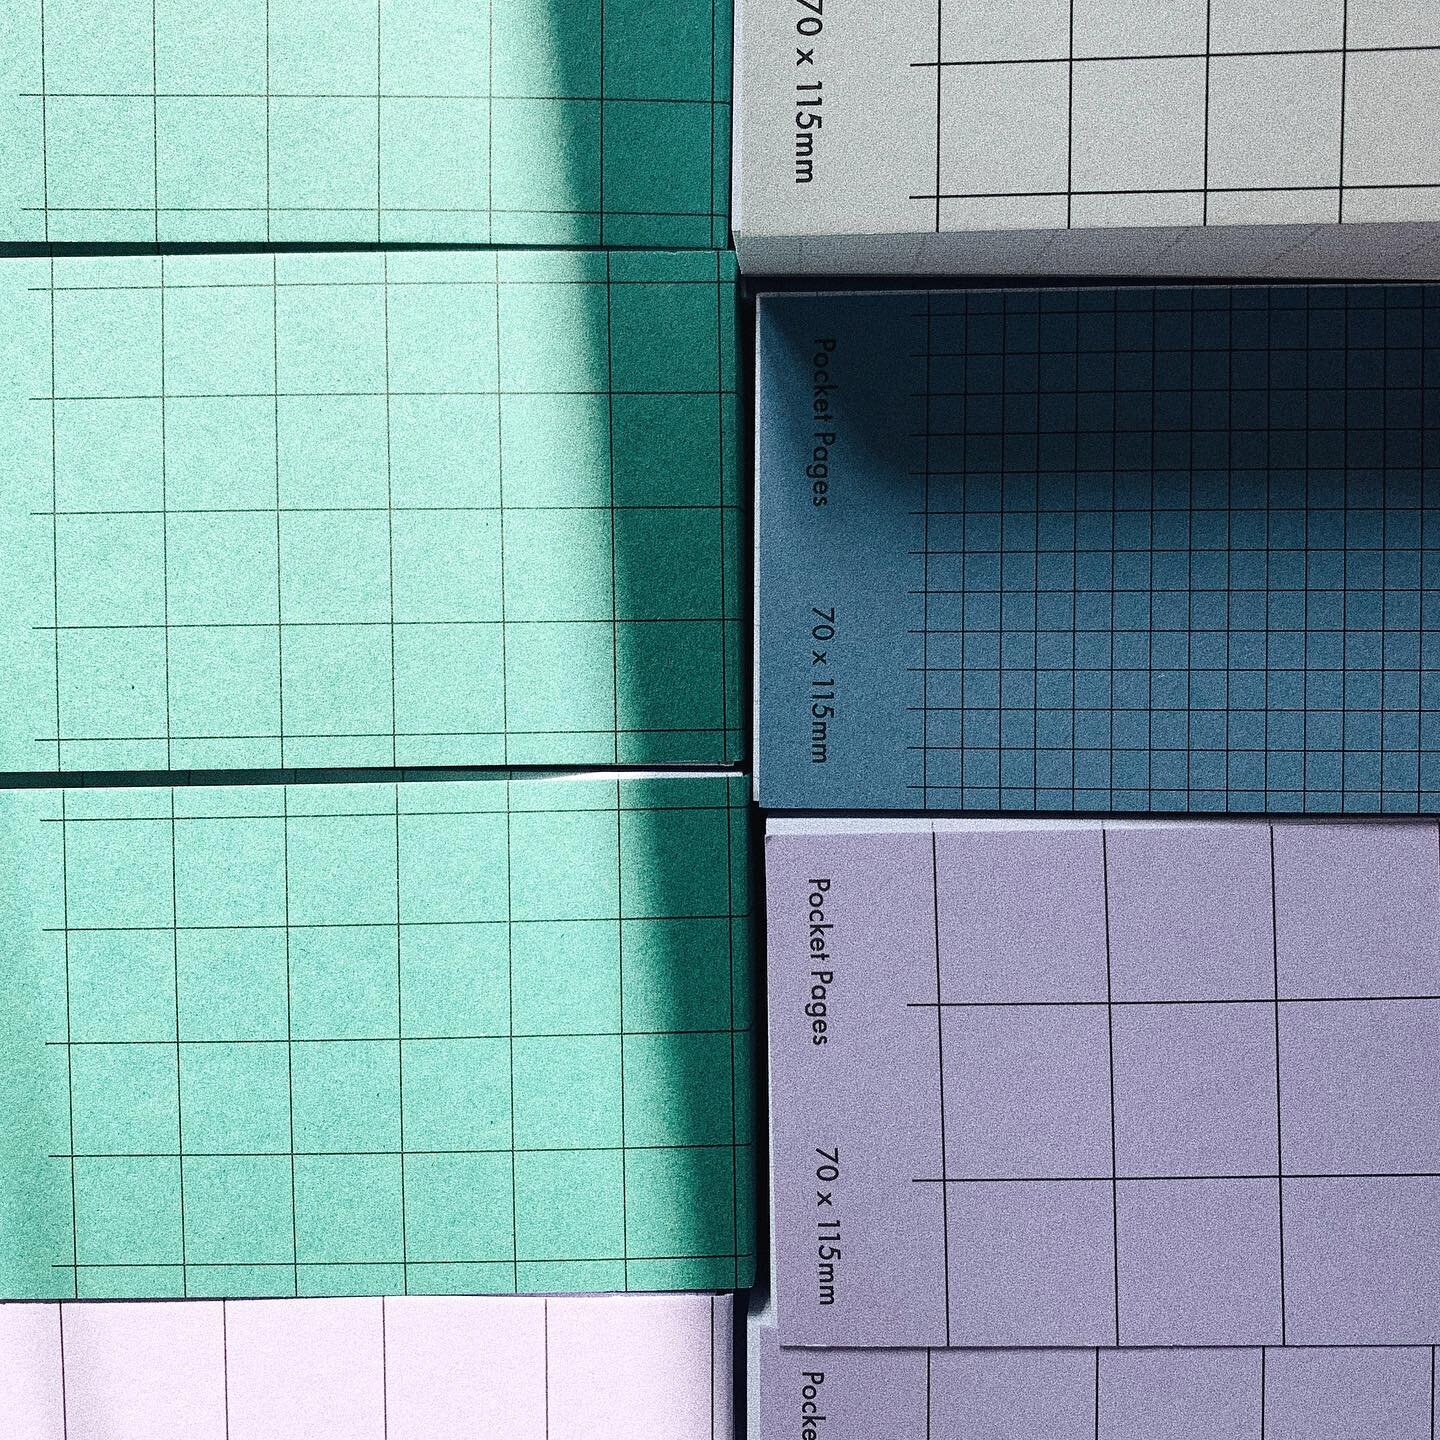 Pocket Pages
&mdash;
Chunky pocket-size notebooks perfect for everyday desktops or to carry around your notes, thoughts and sketches. 
They&rsquo;re available in Forest, Lilac, Sky, Cloud 
and Moss, with four different grid sizes.